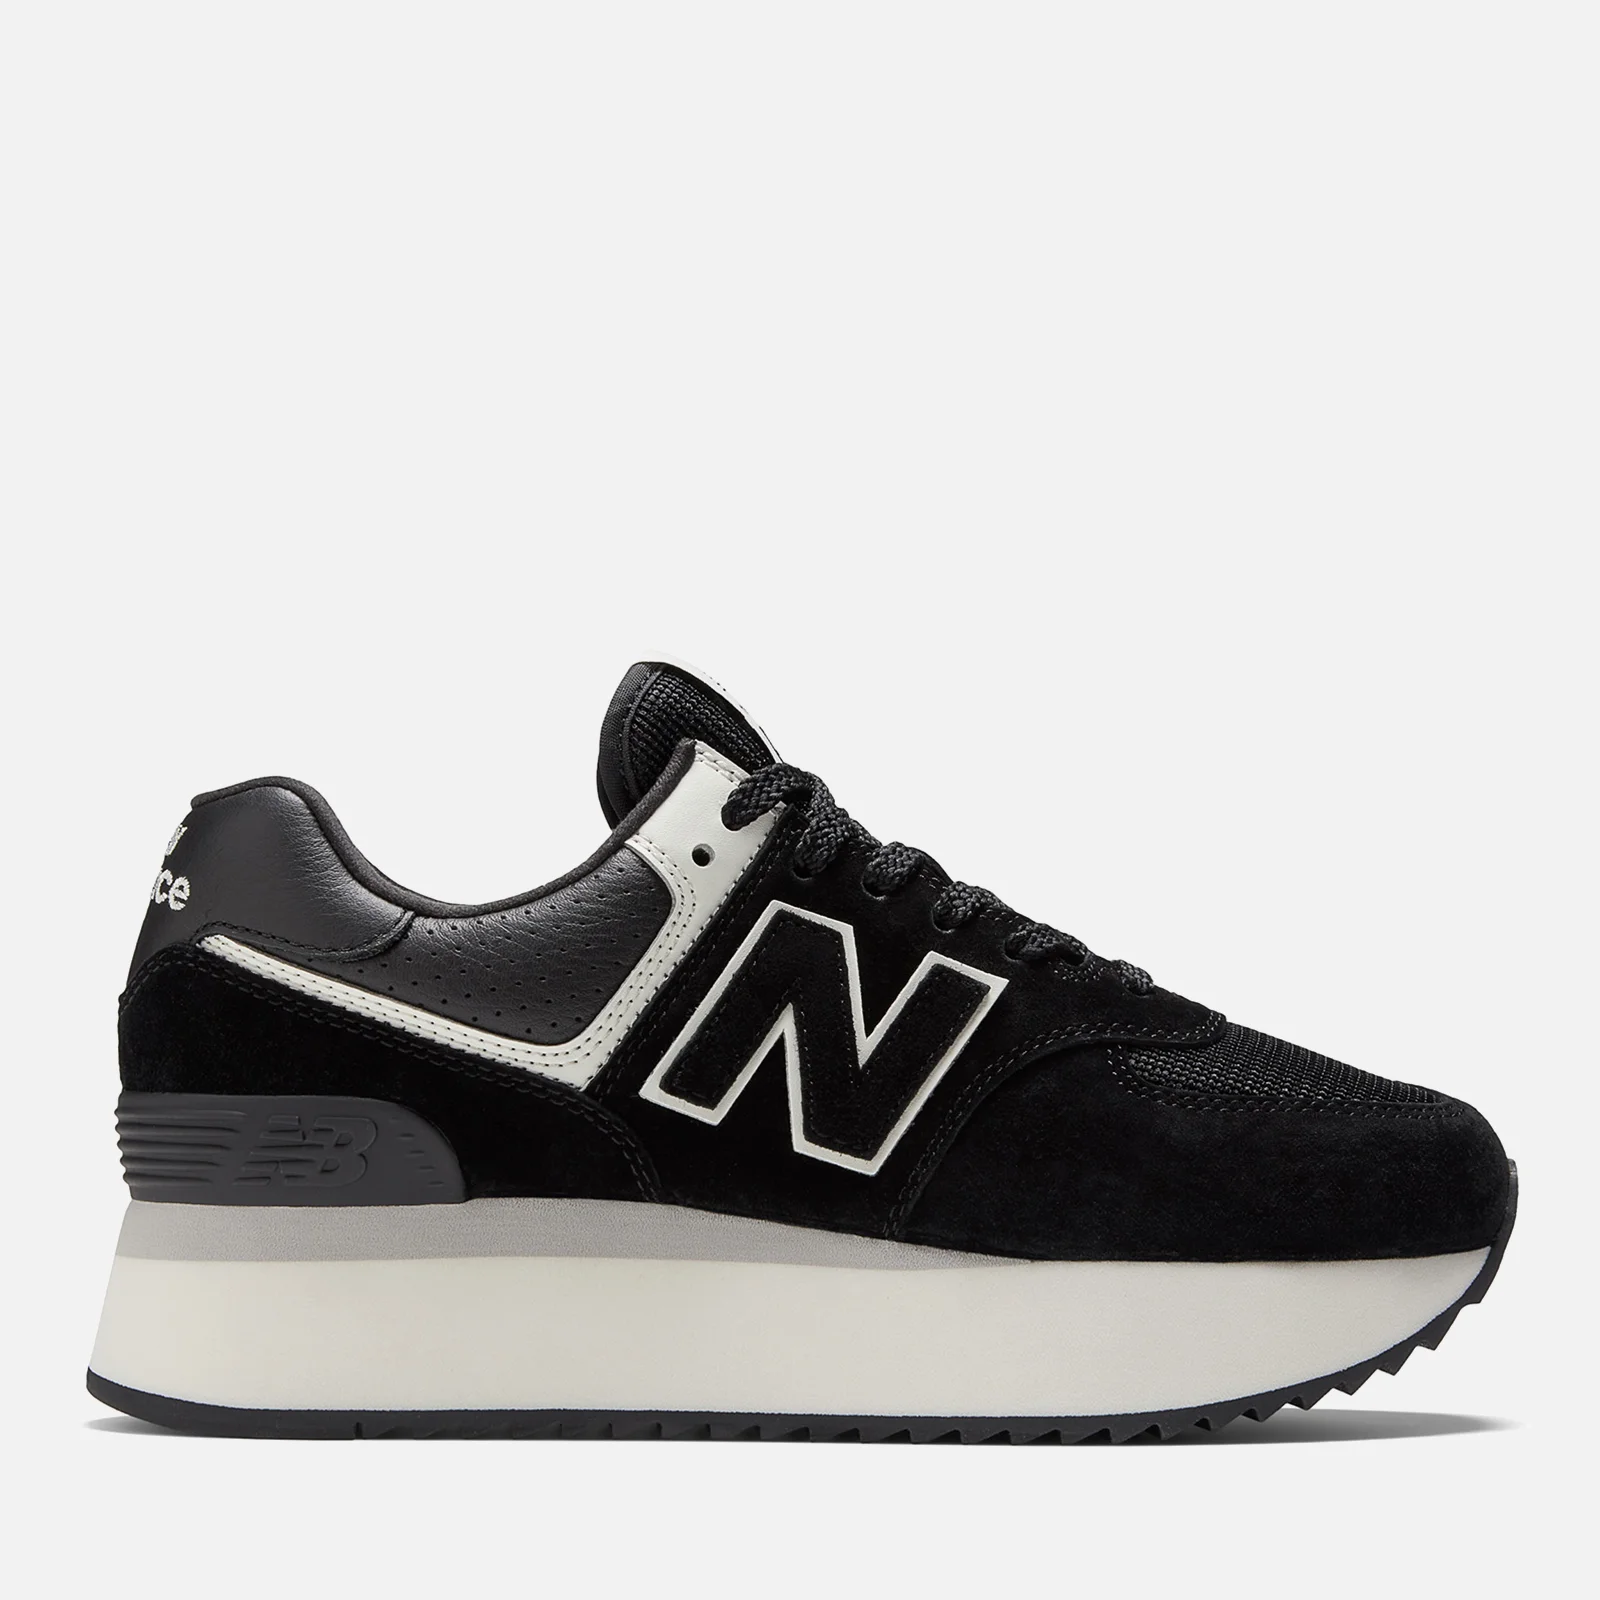 New Balance Women's 574 Suede, Leather and Mesh Trainers Image 1